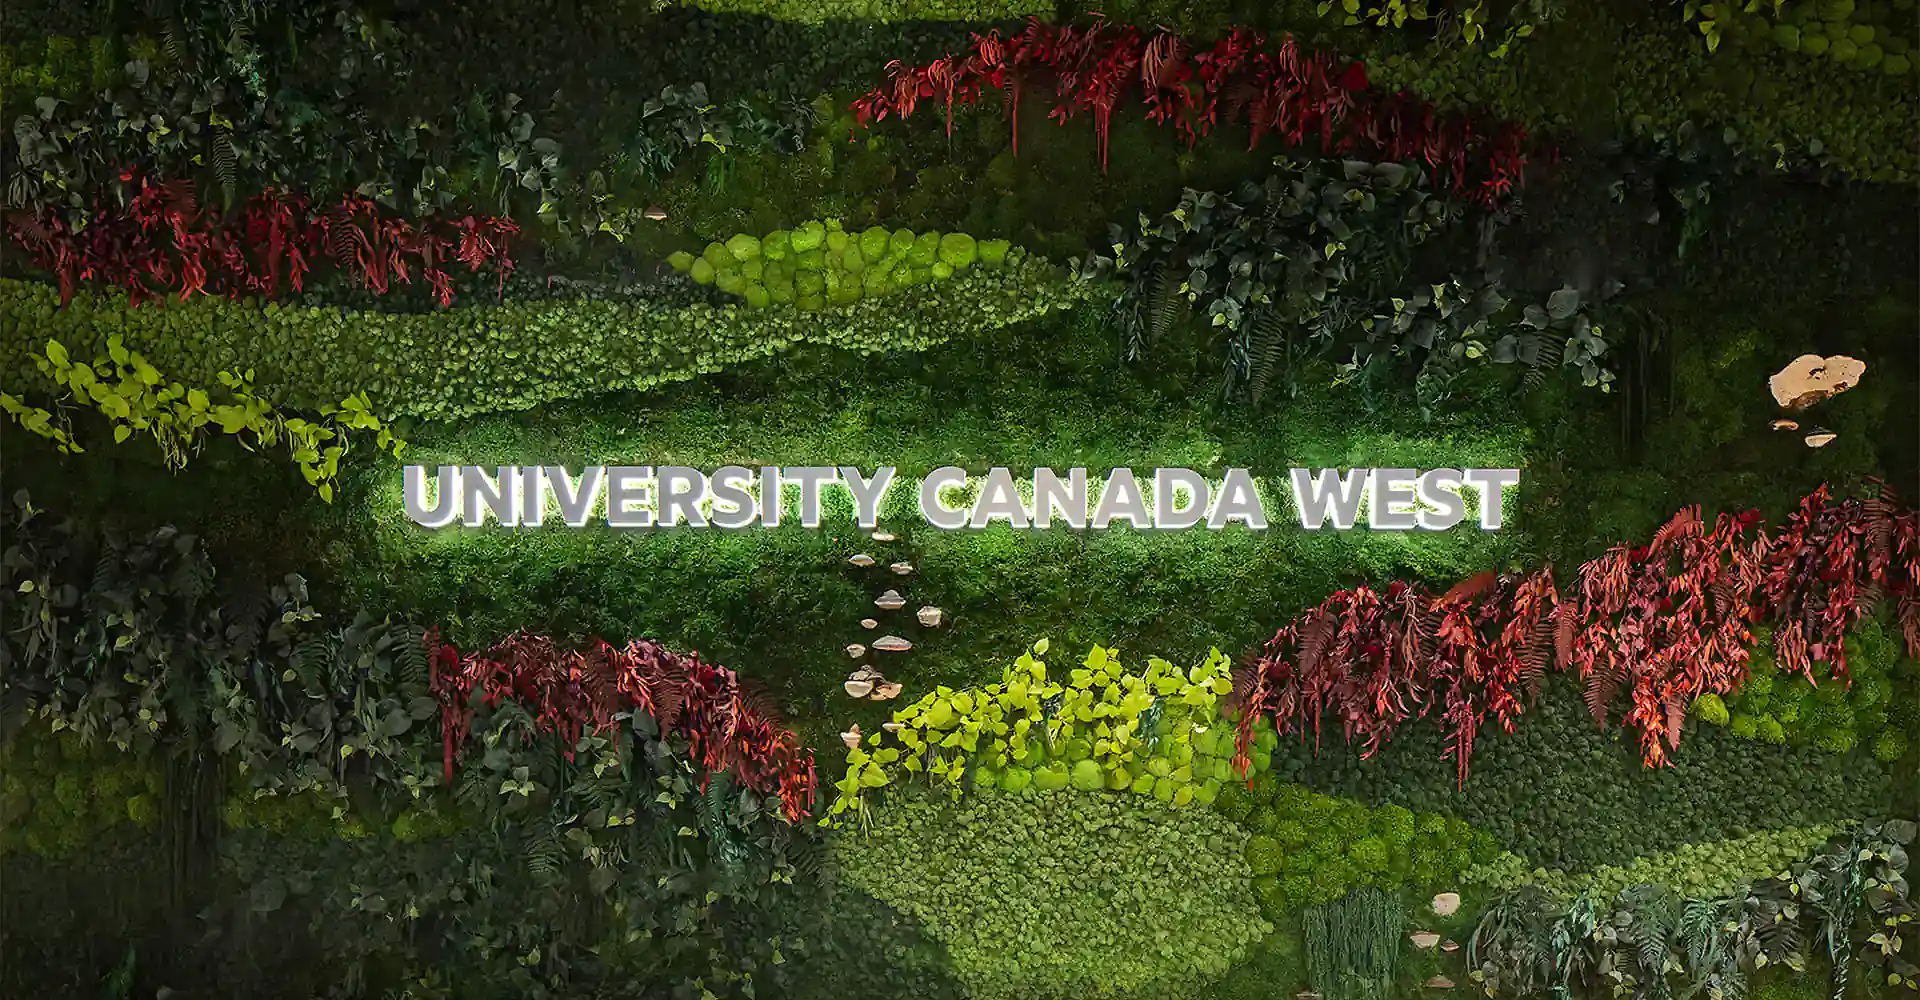  Why study at University Canada West?